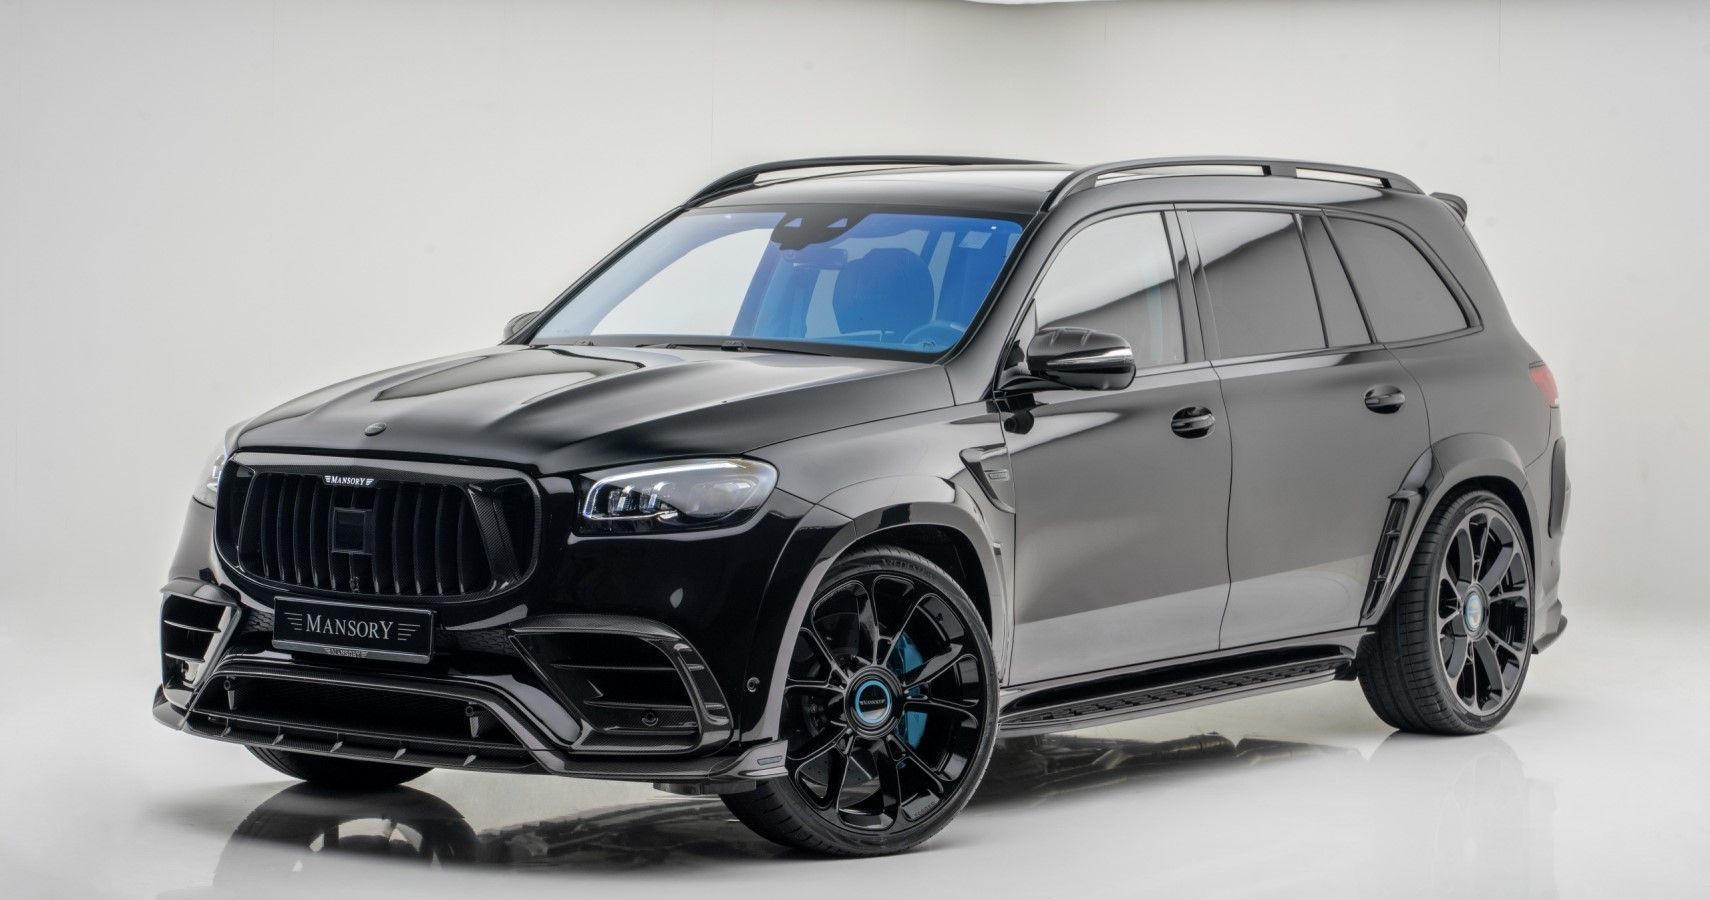 Mansory Goes The Gothic Route With Its Mercedes-AMG GLS 63 Makeover